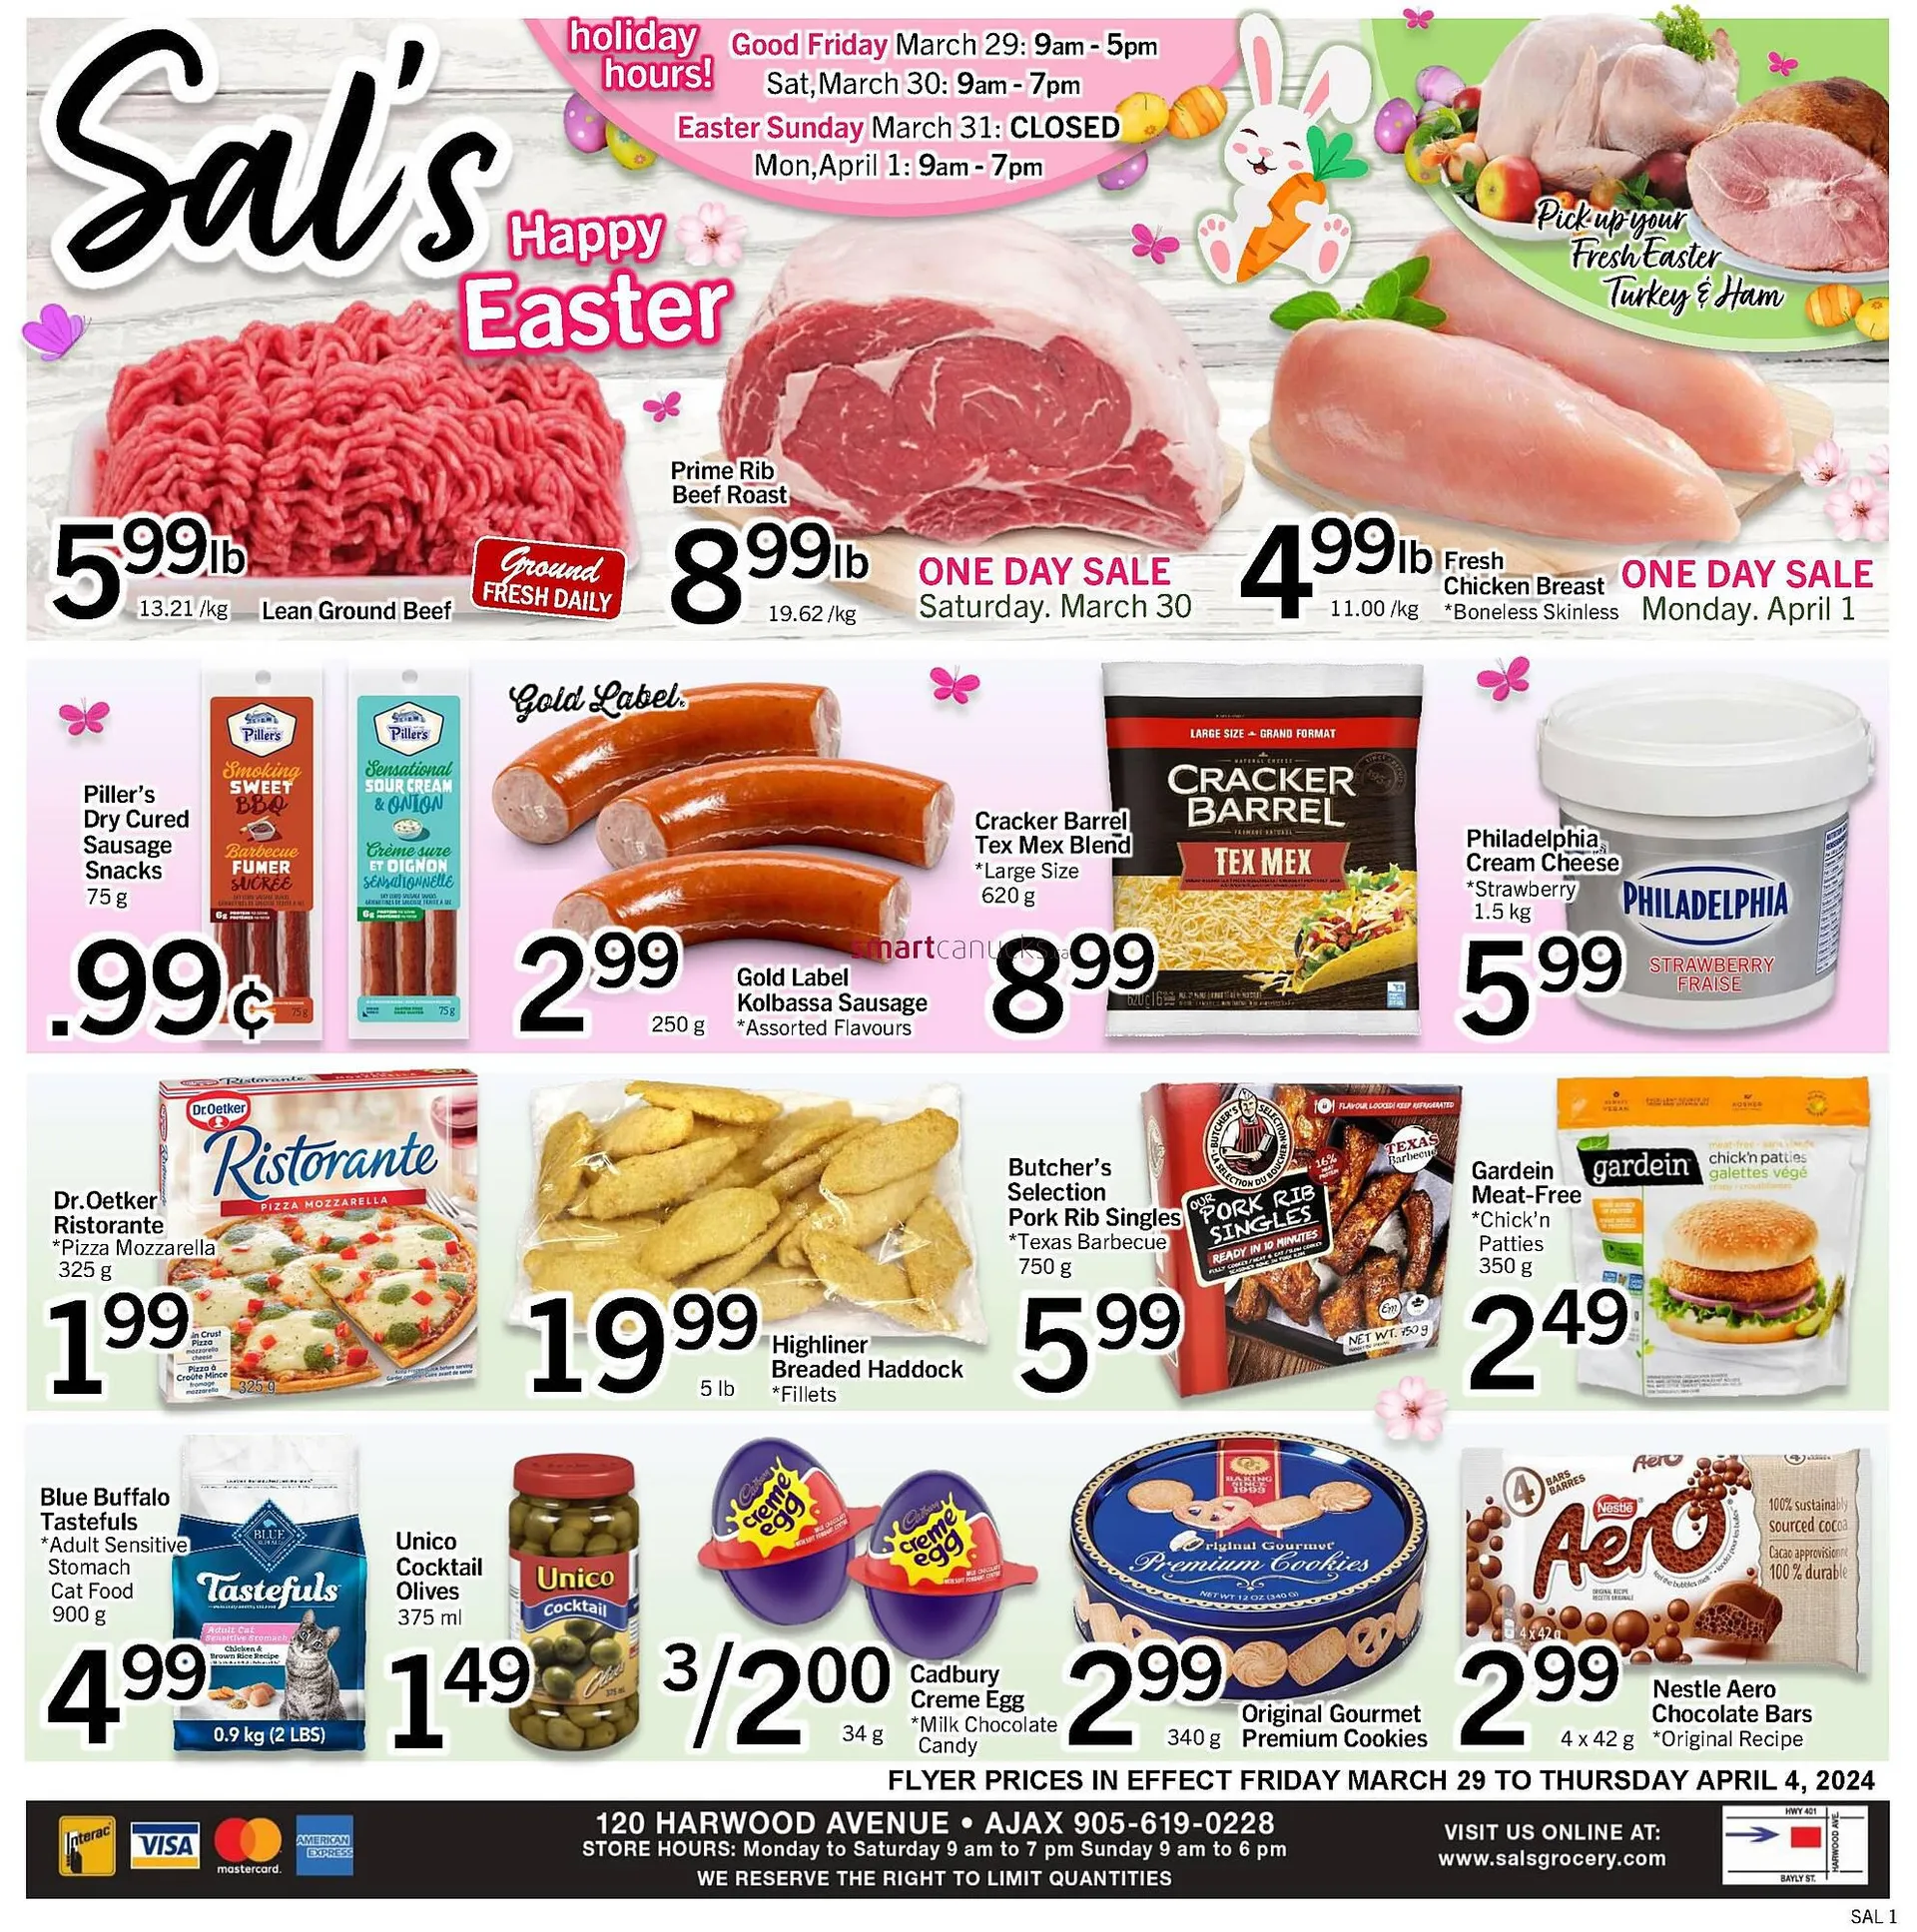 Sal's Grocery flyer from March 29 to April 4 2024 - flyer page 